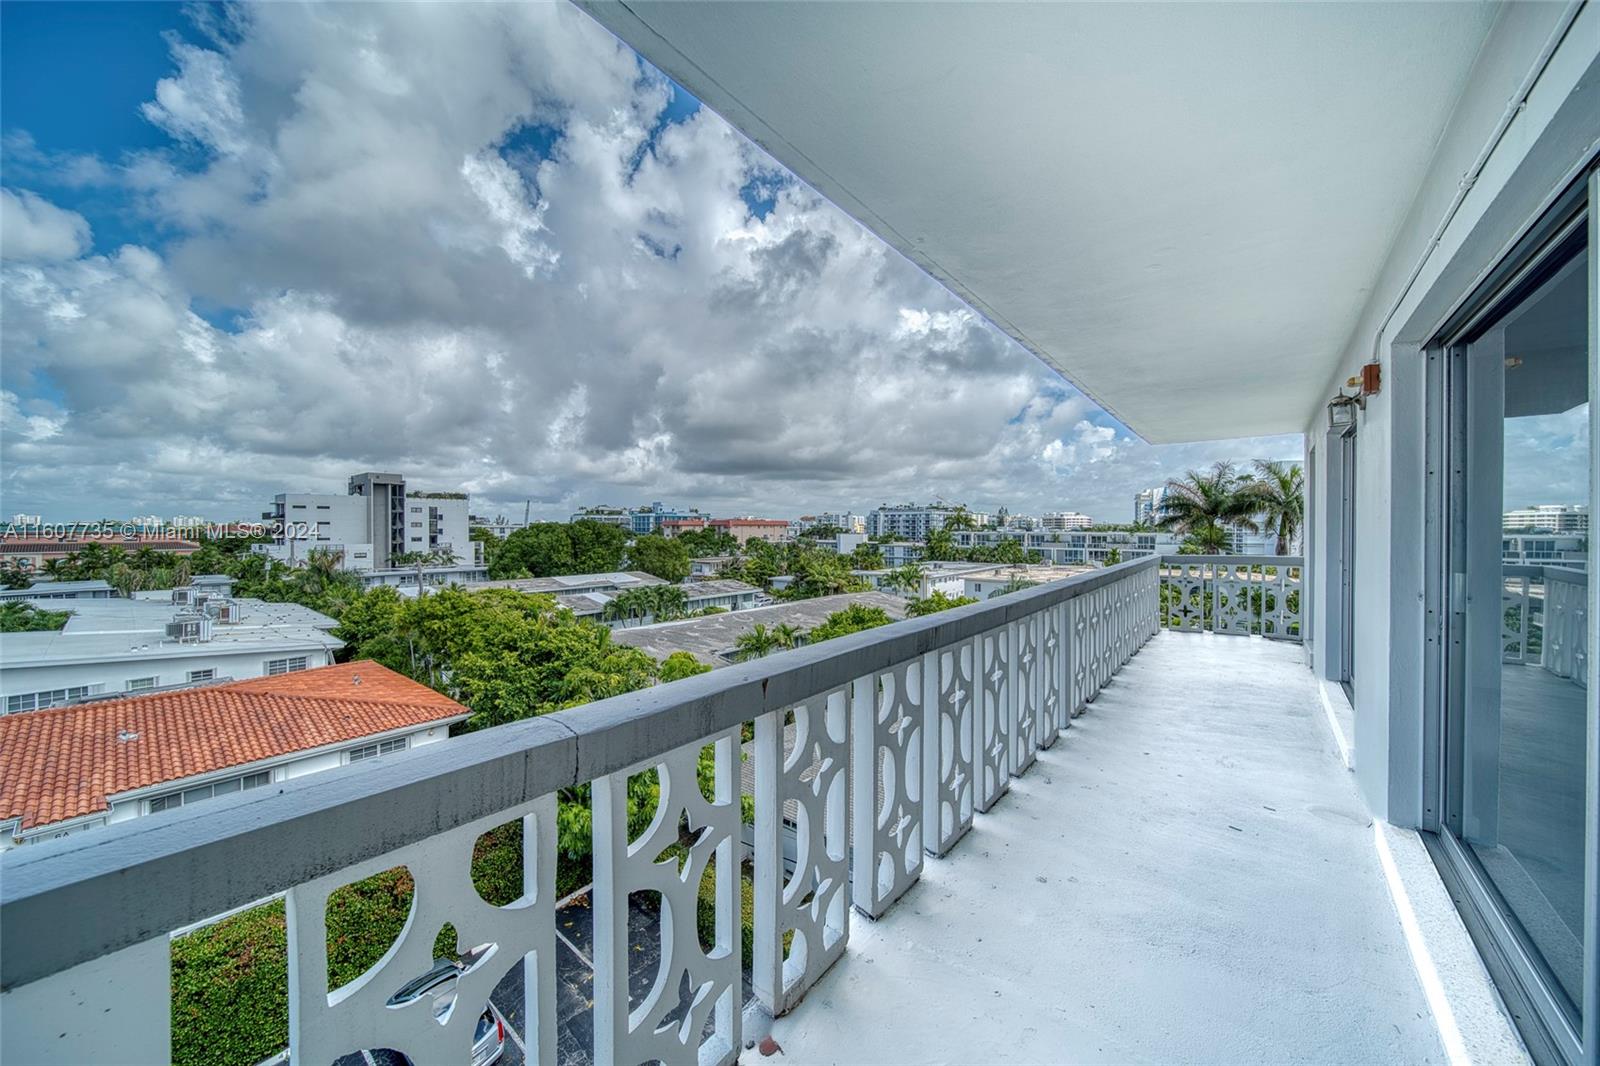 Listed in the iconic Summit Condo, this spacious top-floor corner unit located in Bay Harbor Islands features a brand-new kitchen with quartz countertops, stainless steel appliances, polished terrazzo floors and high impact windows providing safety and plenty of natural light. Enjoy breathtaking views of Bay Harbor from every room and the convenience of an assigned parking space. The secured building features a newly-renovated lobby, communal laundry room, bike storage, clubhouse and a welcoming barbecue area. This vibrant community is ideal for both owners and investors. Just steps from dining, shops, A-rated schools, pristine beaches, and Bal Harbour Shops.